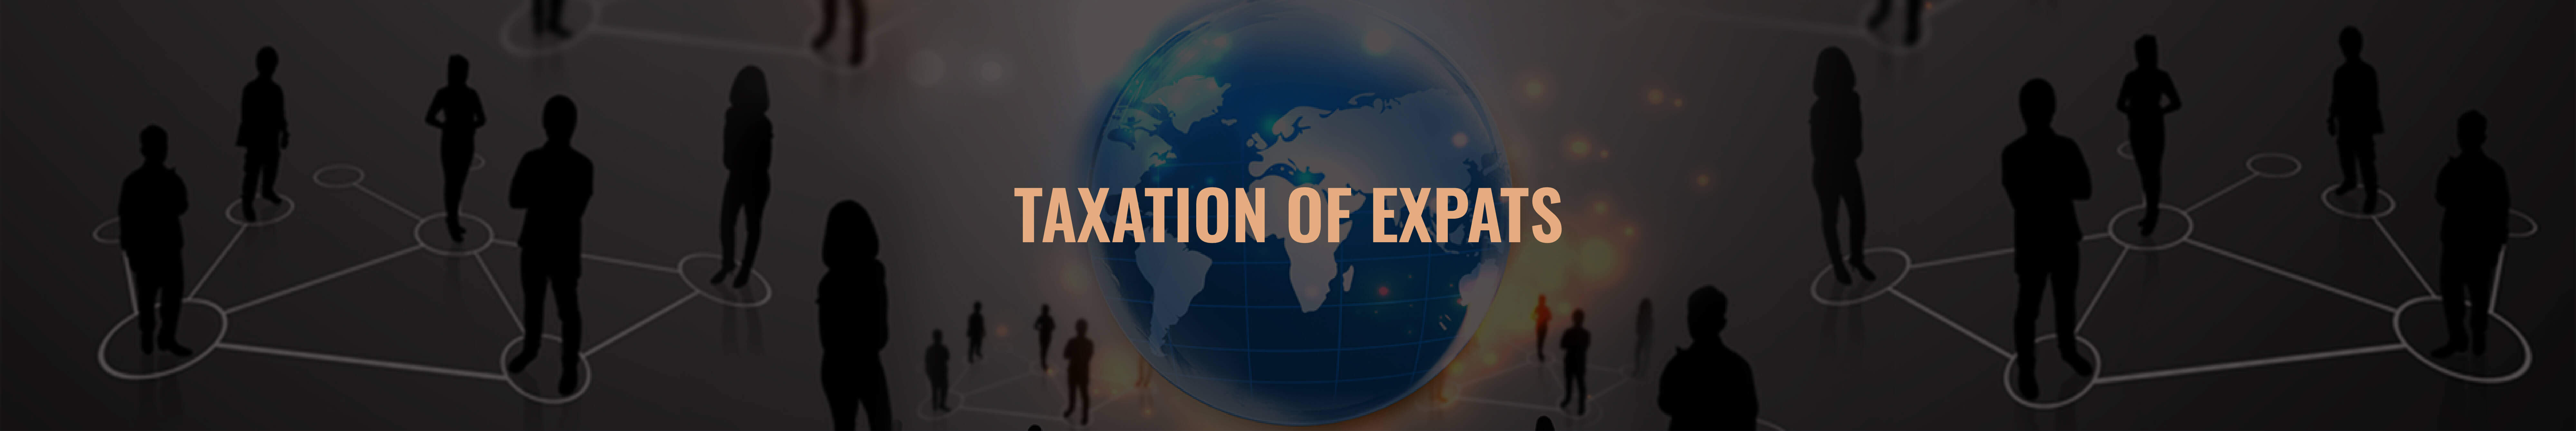 Taxation of Expats